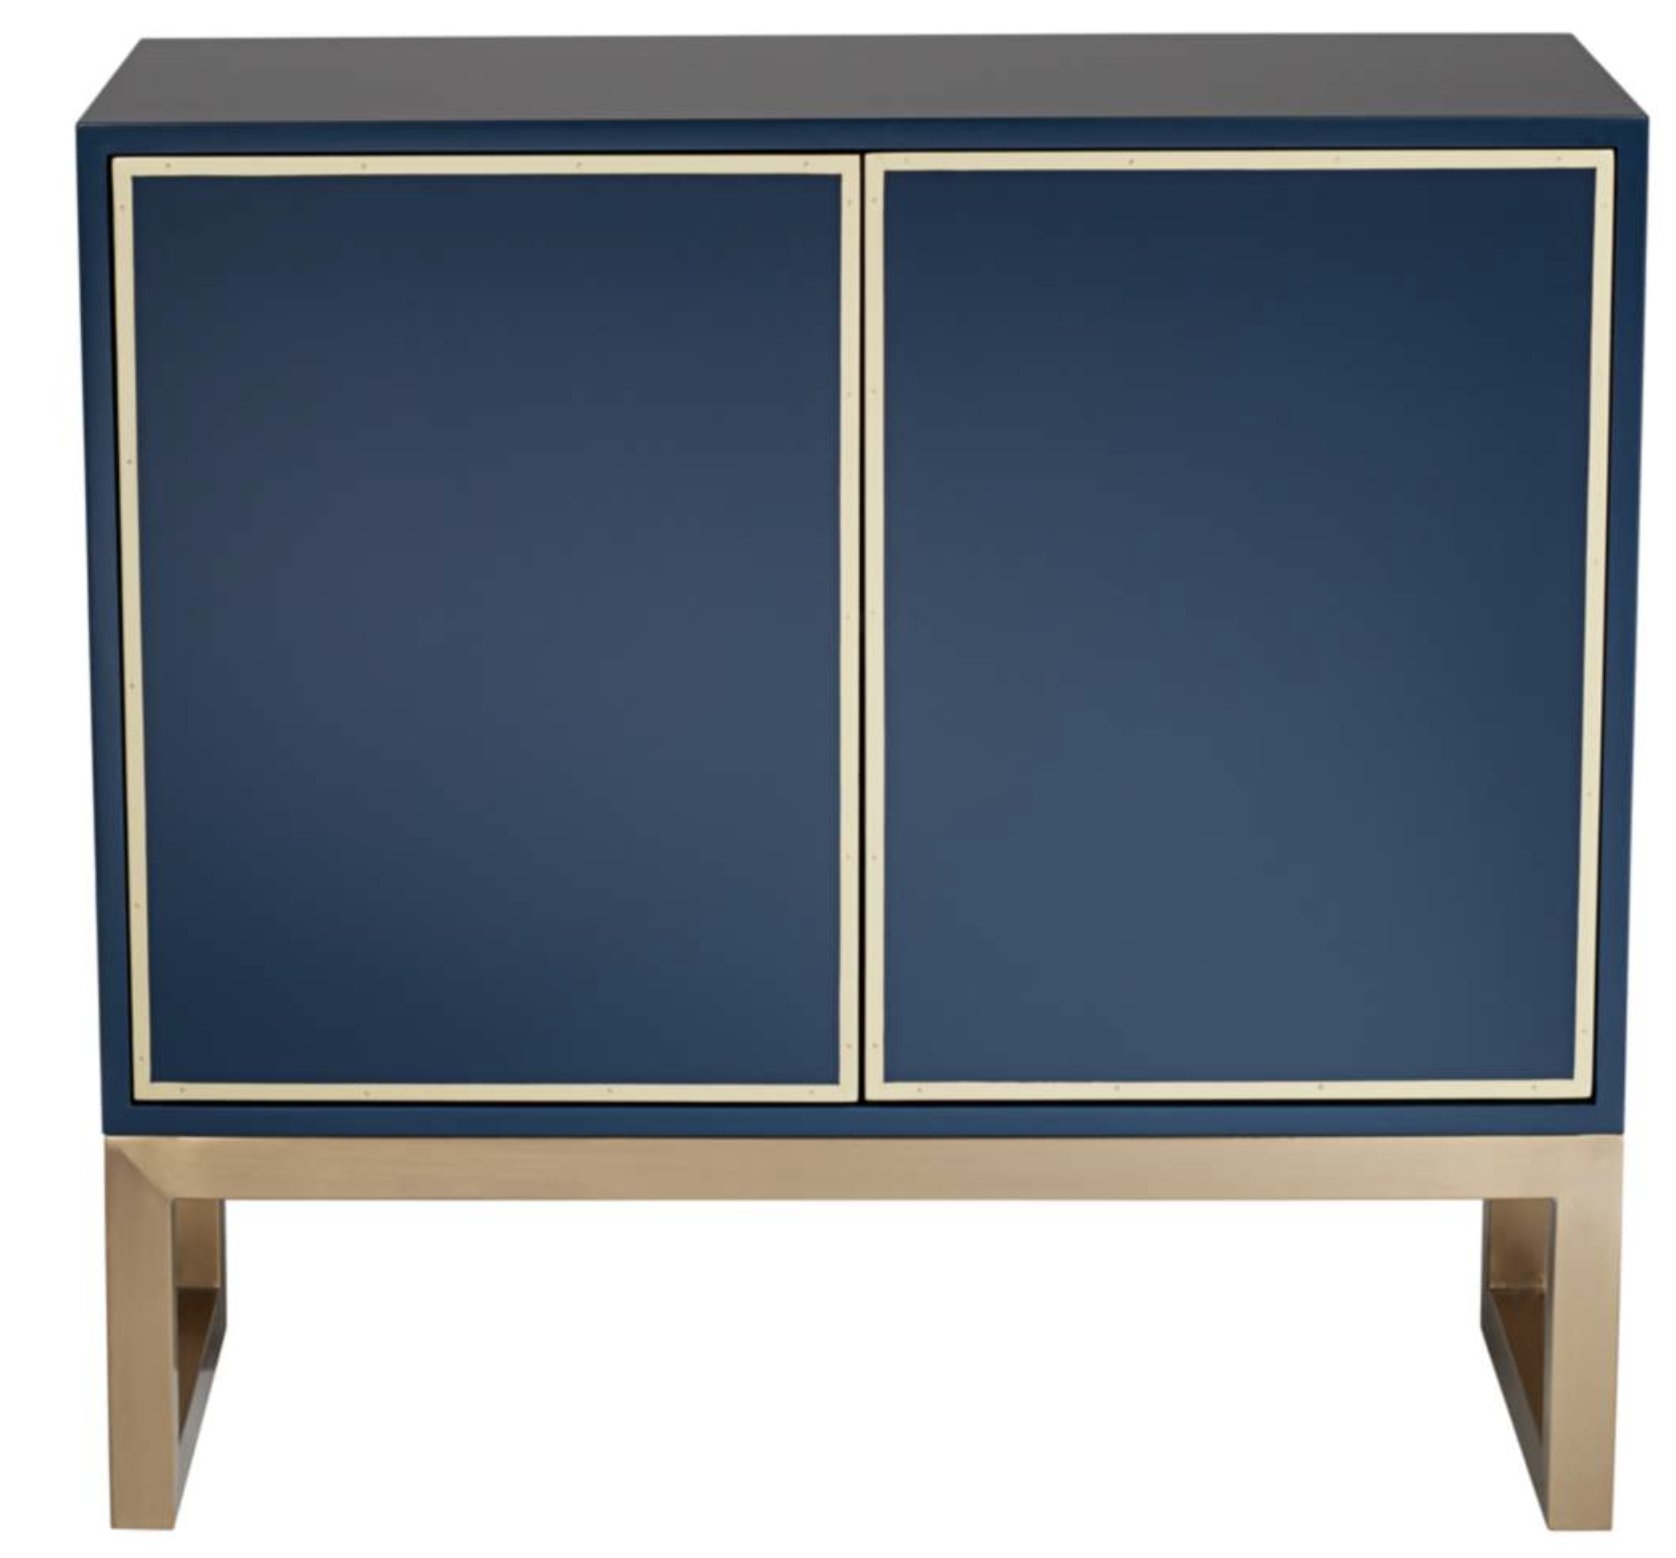 Tarim 35 3/4" Wide Blue and Gold 2-Door Accent Cabinet - Style # 79H97 - Image 1